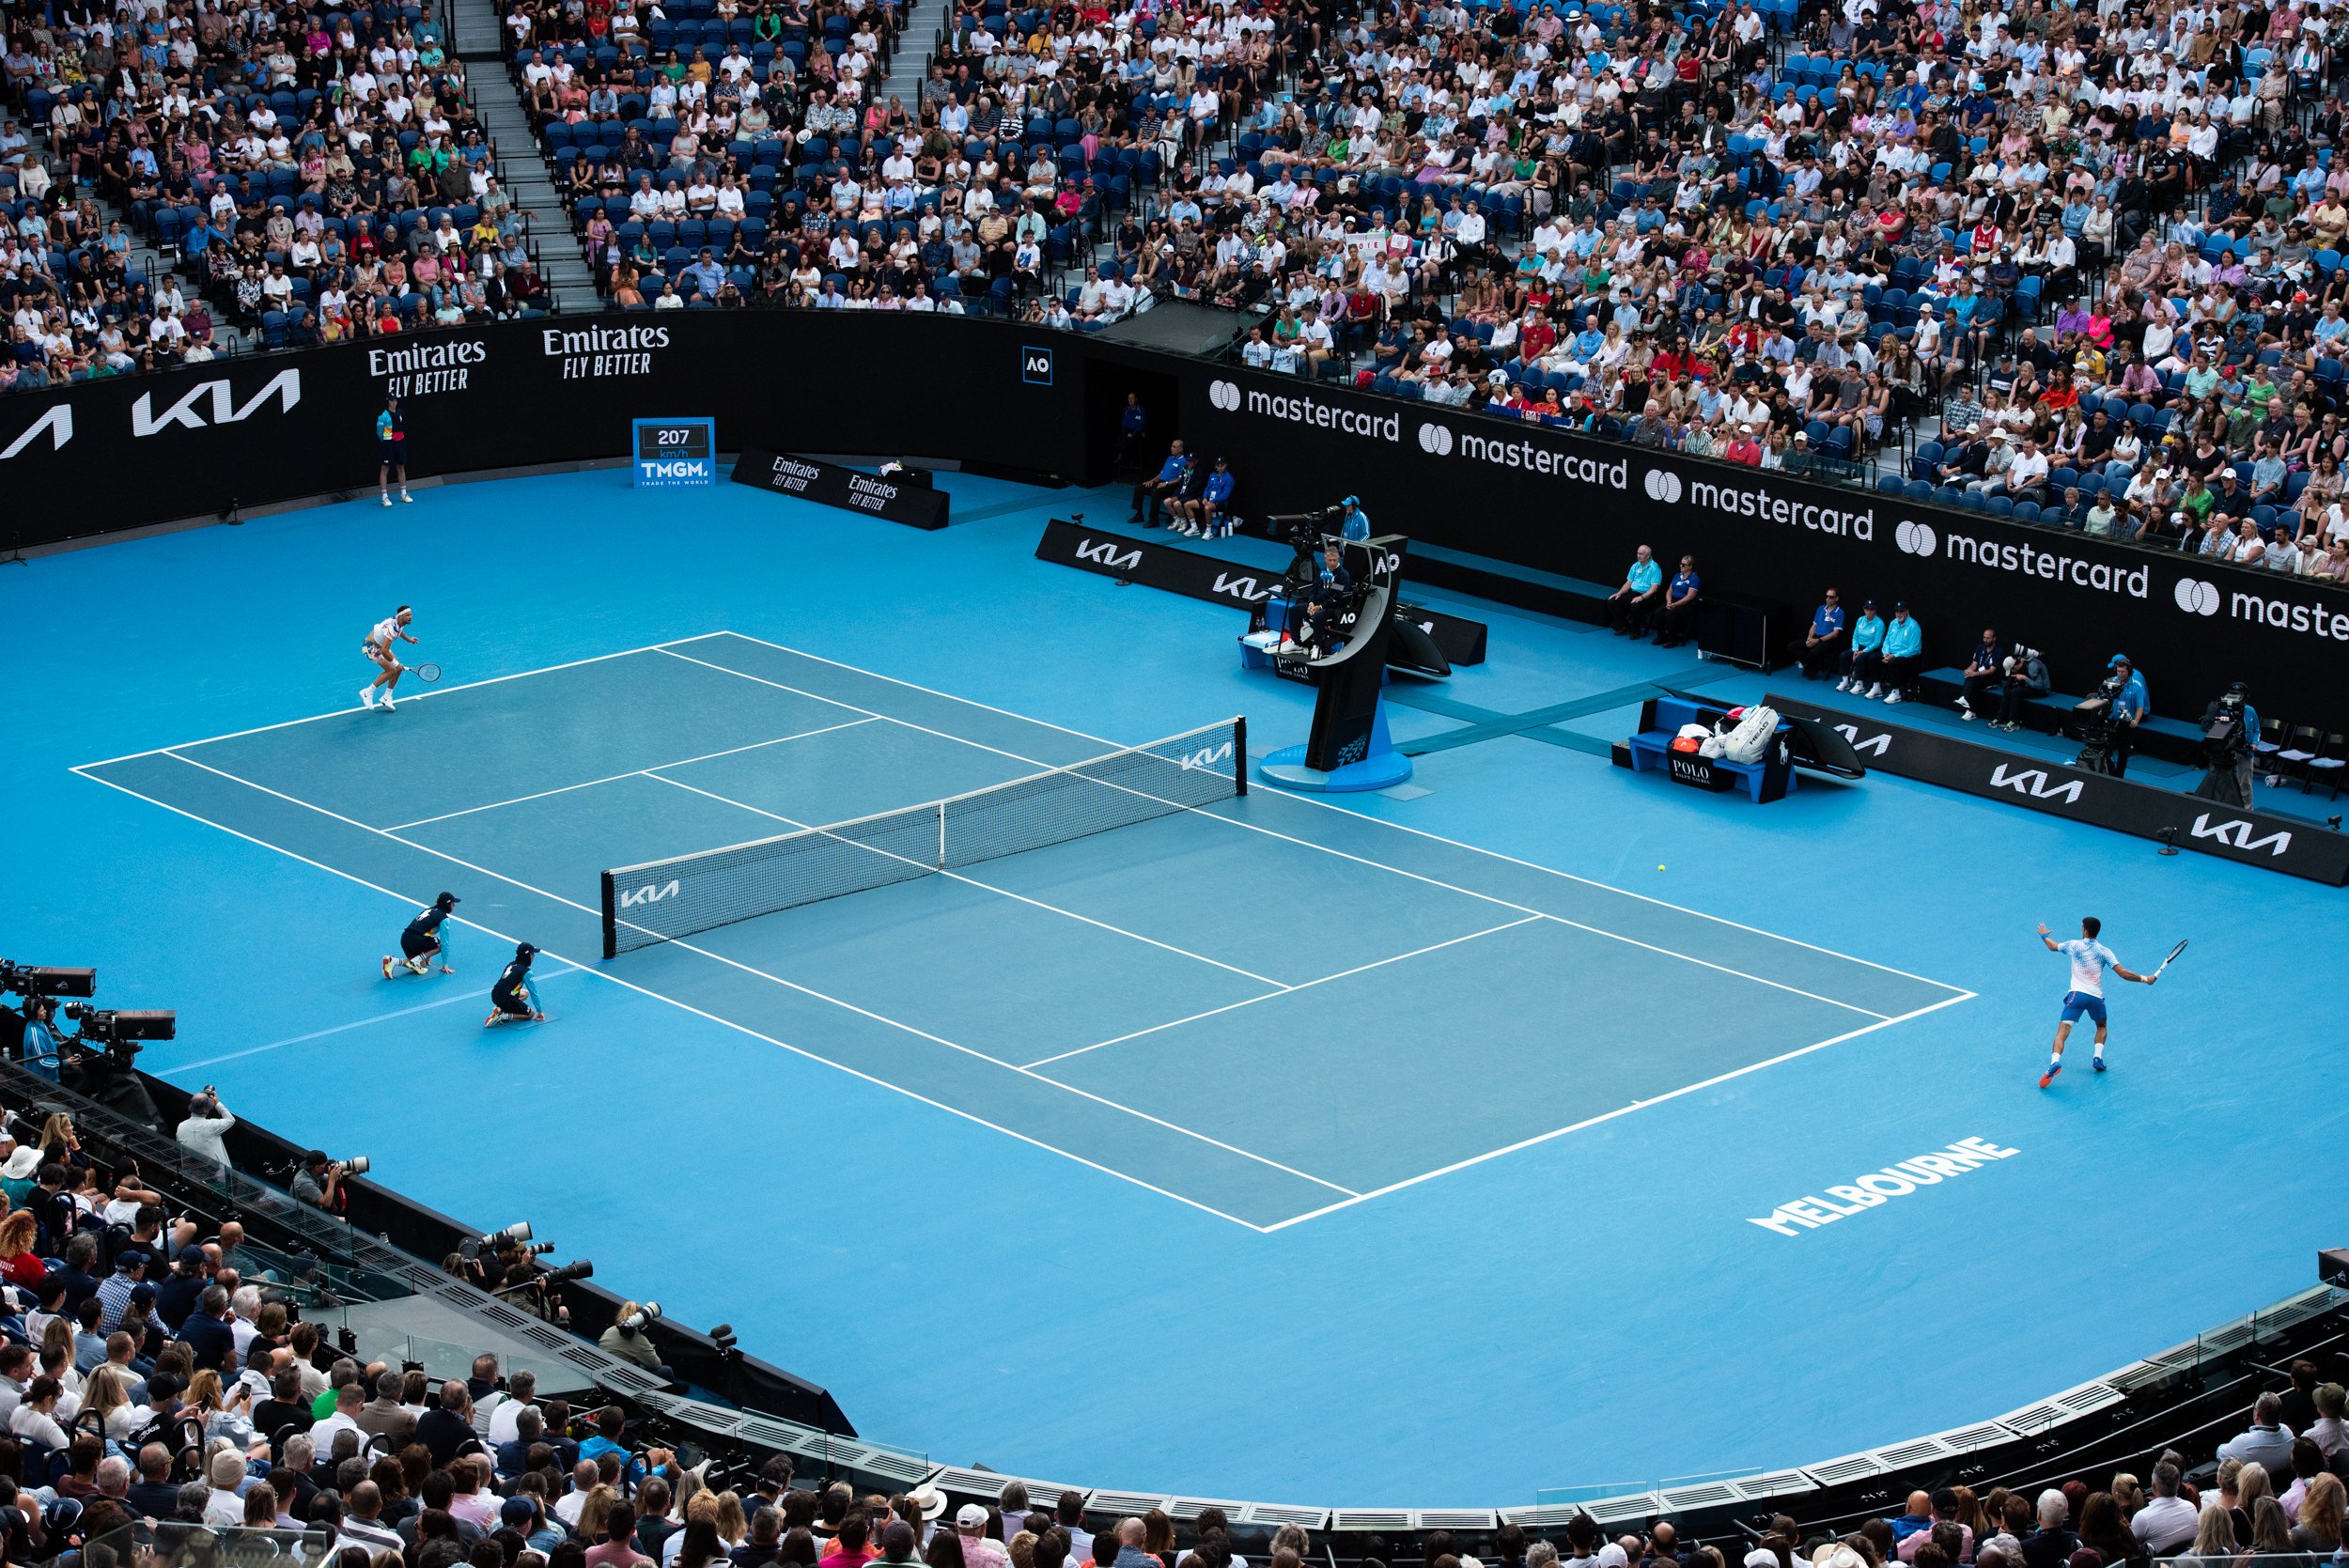 EO Melbourne at the Australian Open 2023 Superbox Experience — EO Melbourne